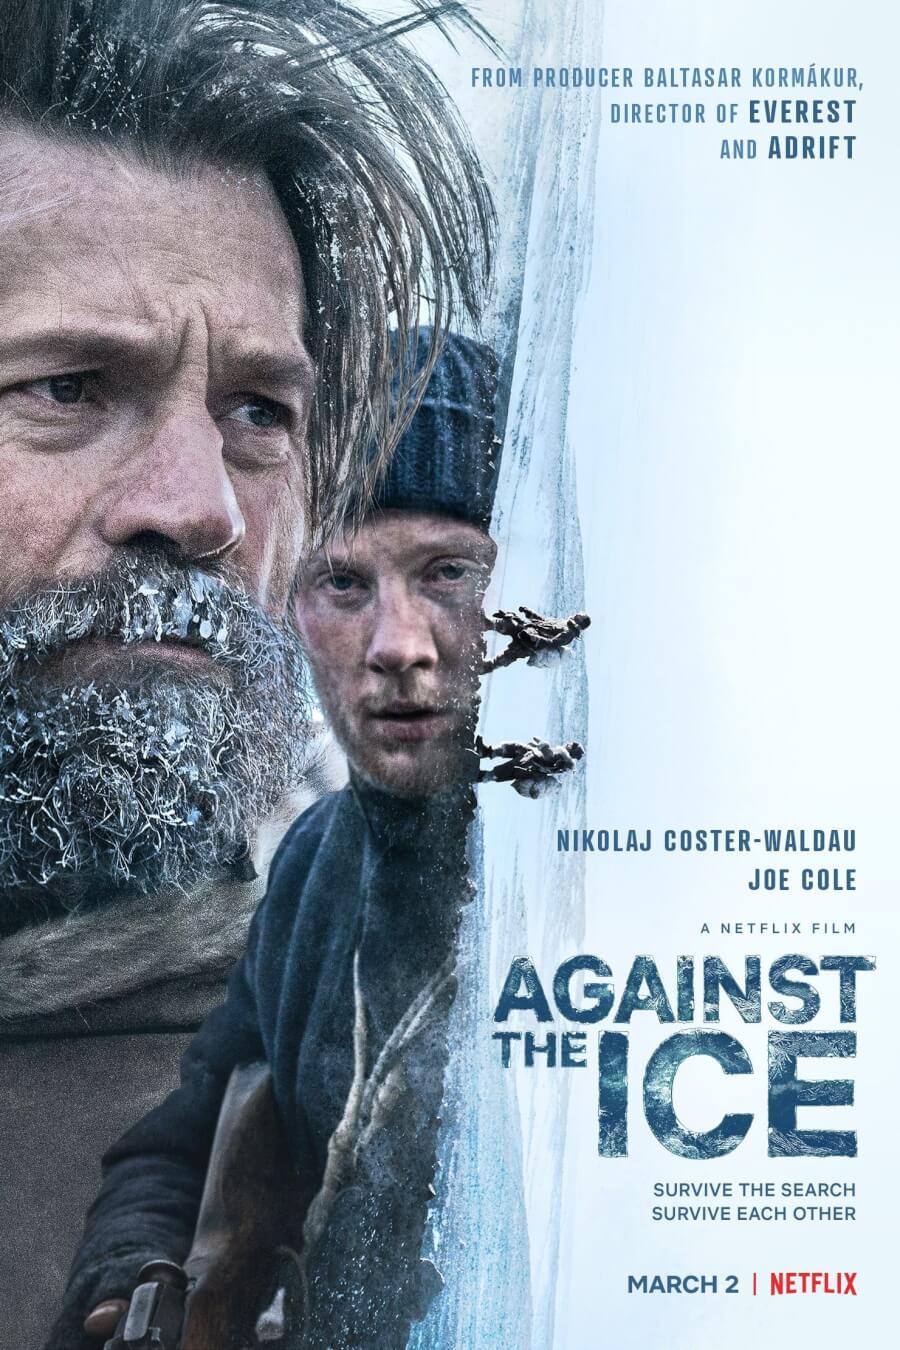 against the snow netflix movie poster